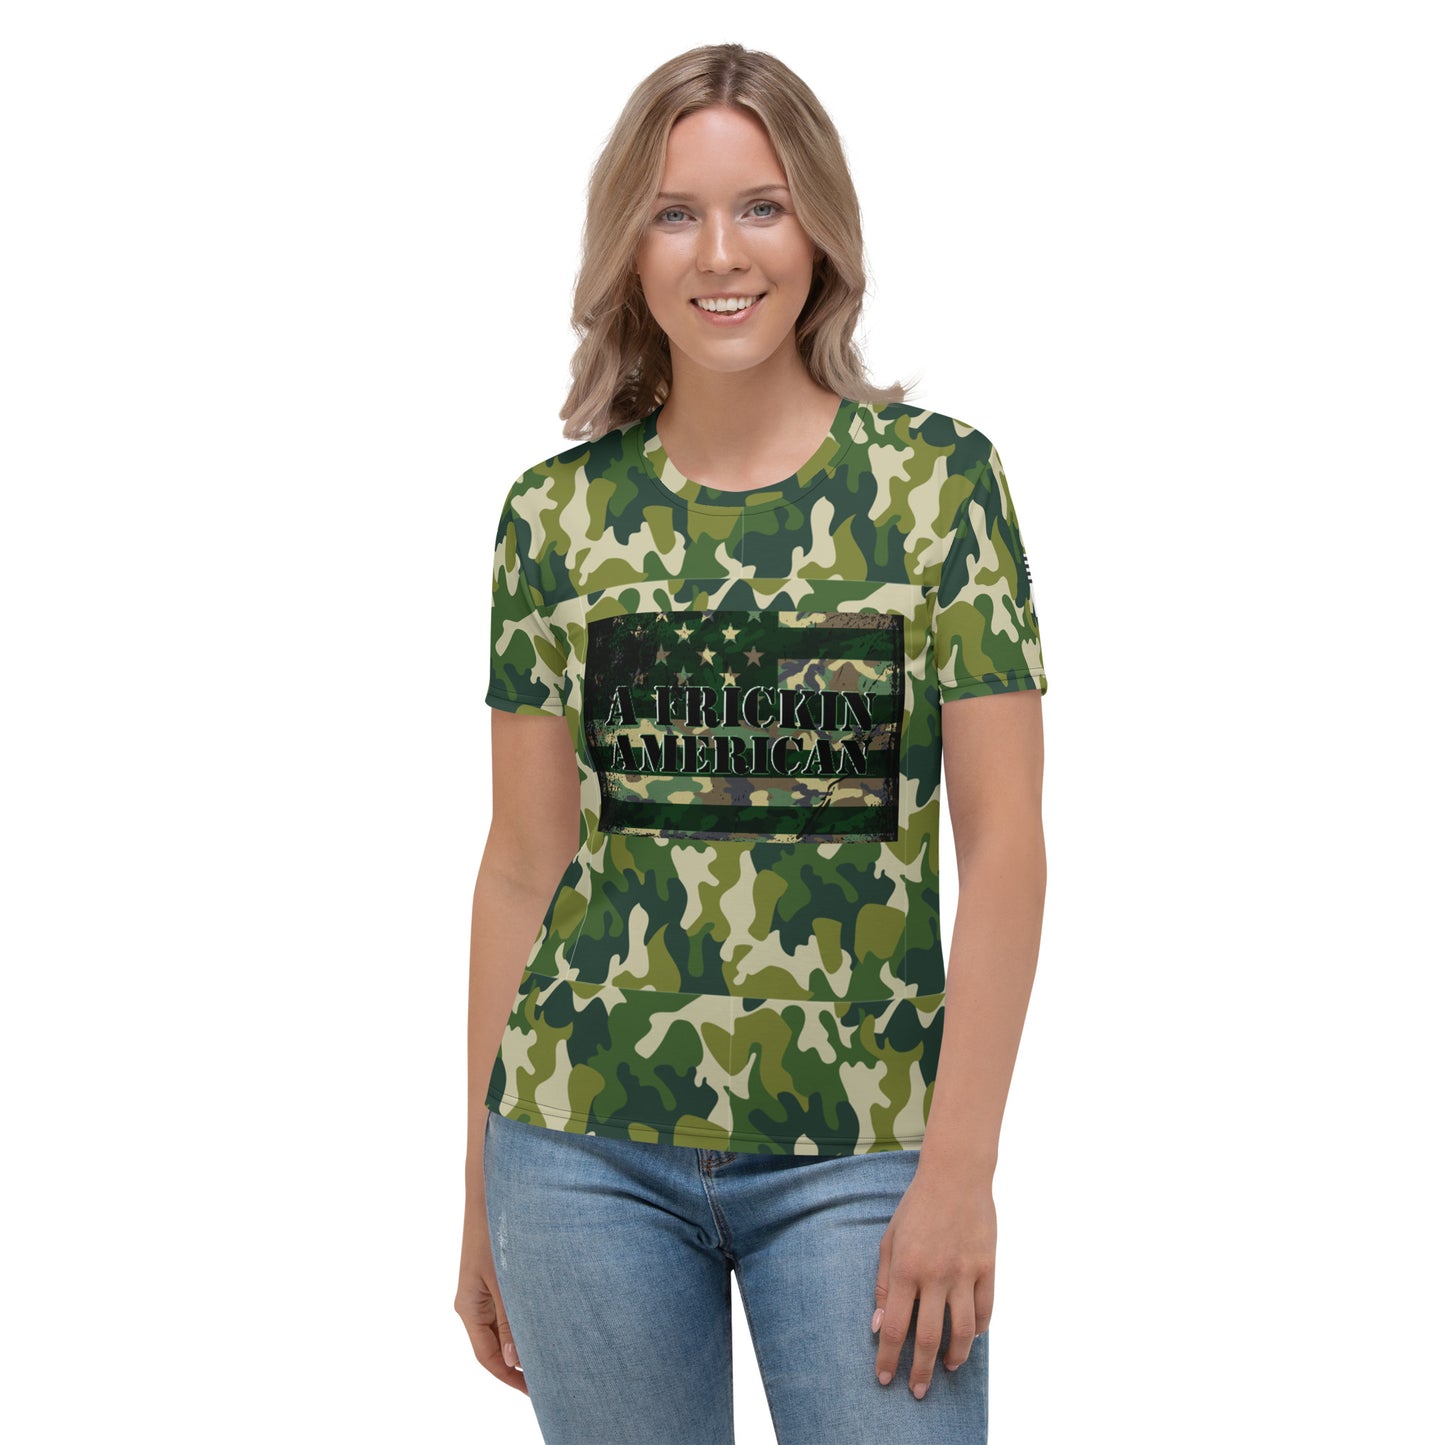 A Frickin American All Camouflage- Women's T-shirt